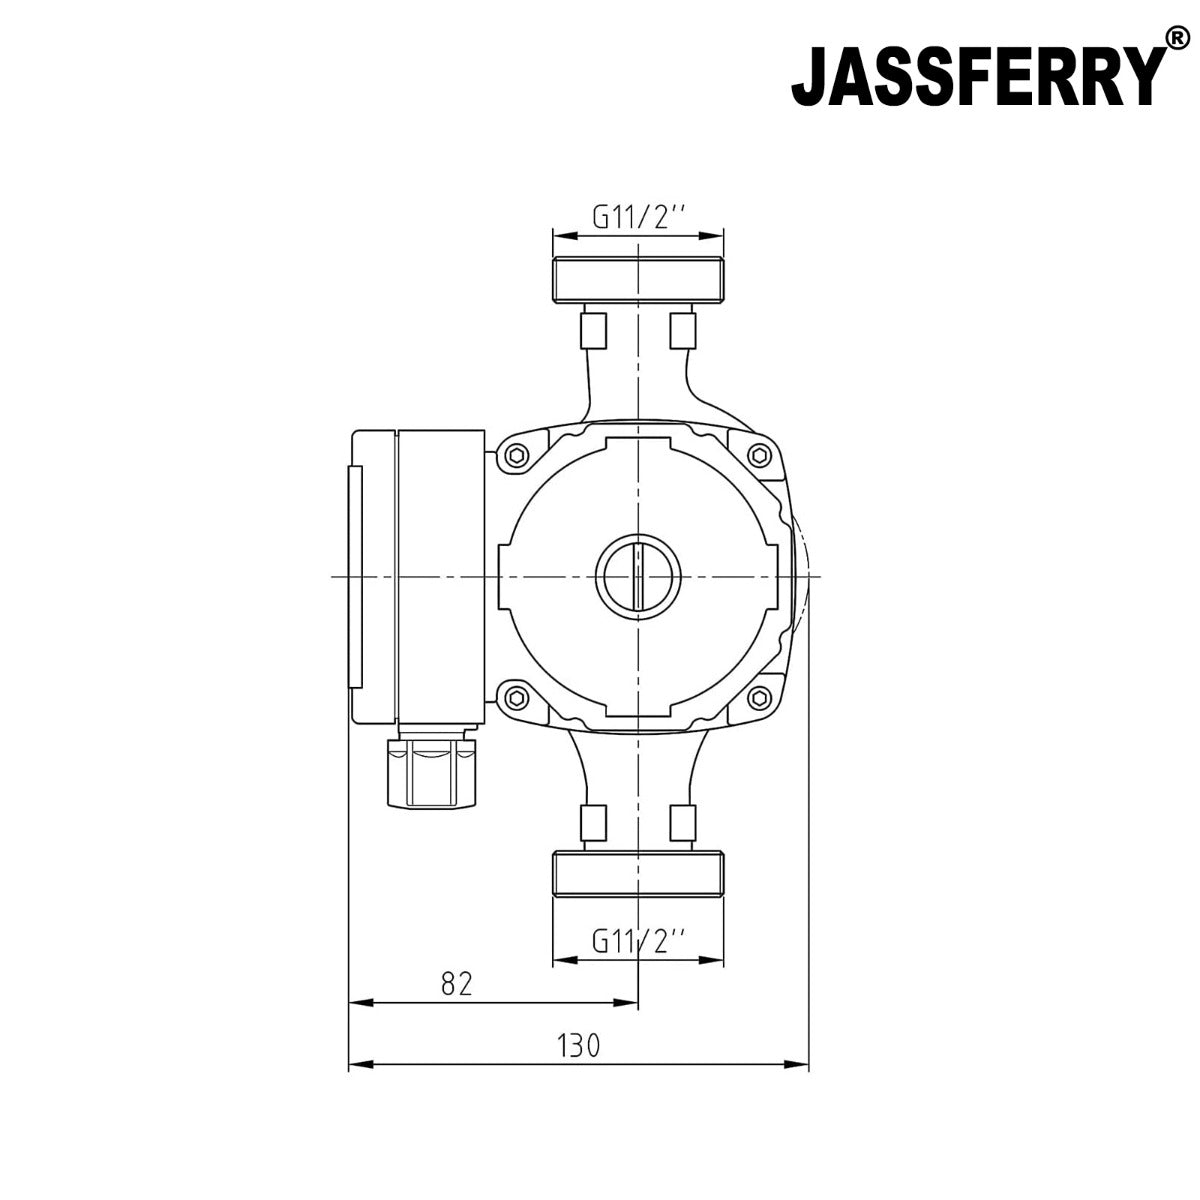 JassferryJASSFERRY A-Rated Central Heating Pump Energy Saving Circulation with Power MonitorHeating Pumps